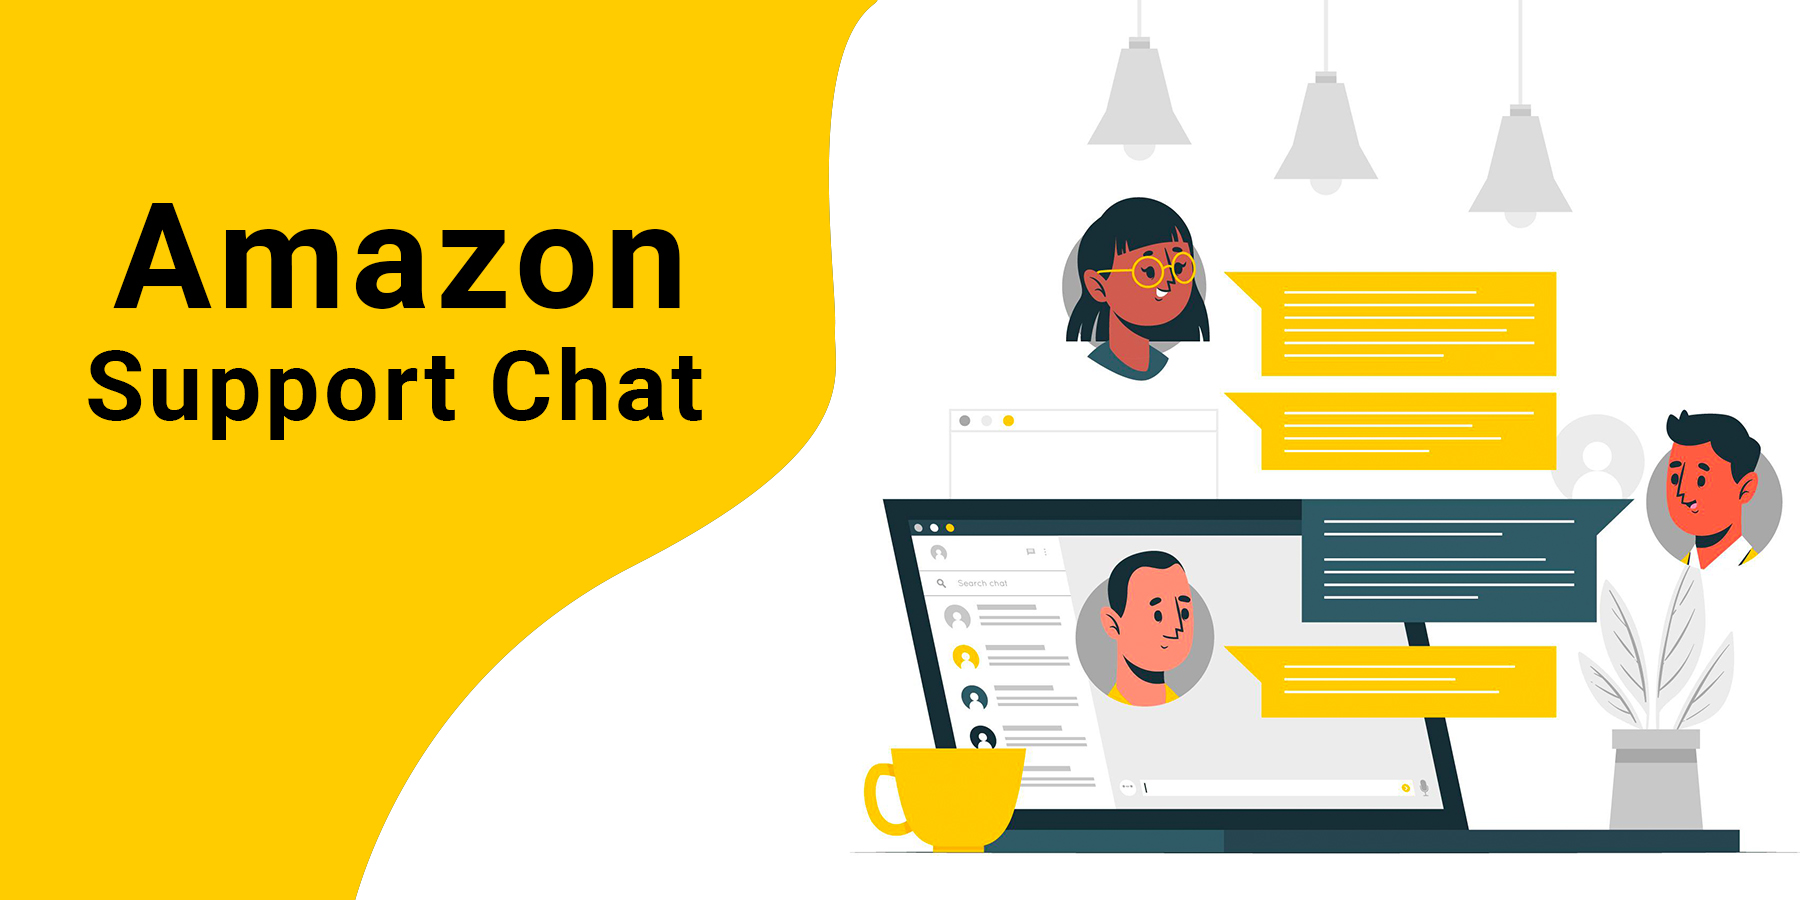 Amazon Support Chat